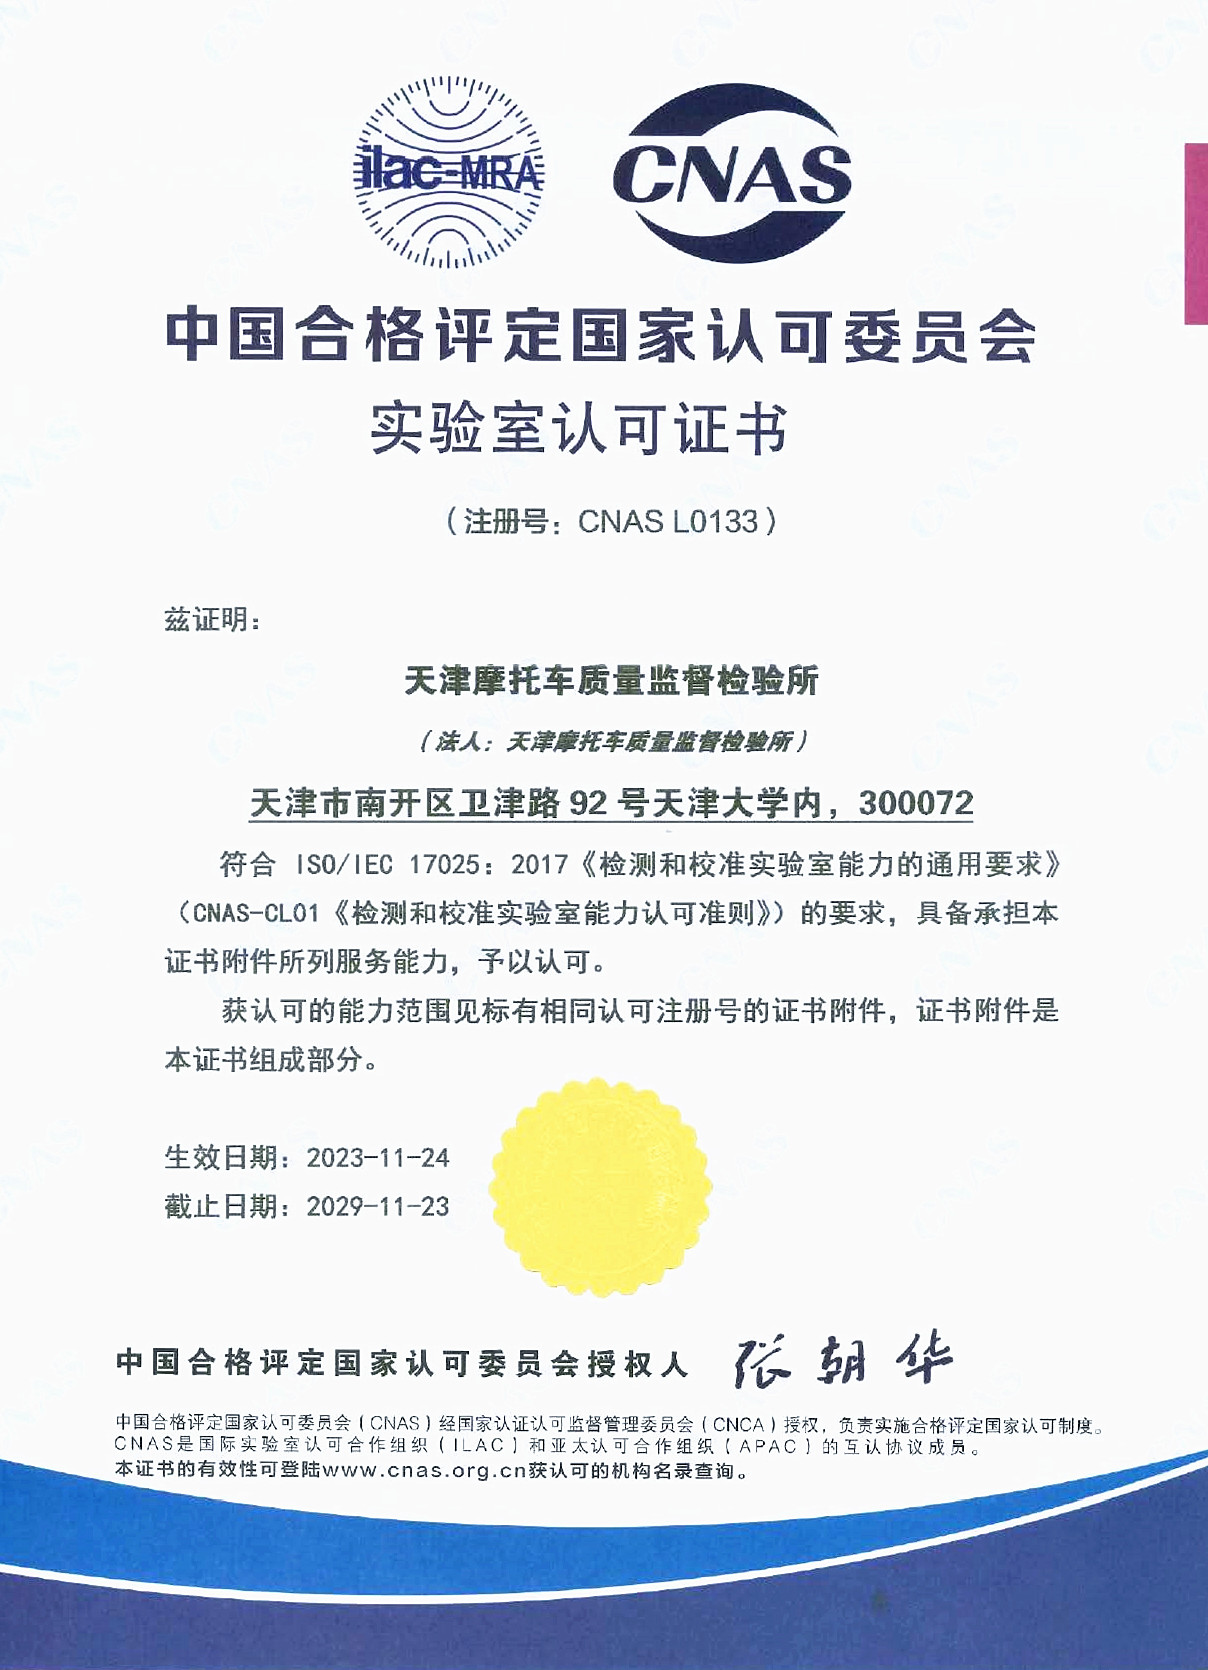 Accreditation certificate of Tianjin Motorcycle Quality Supervision & Testing Institute (in Chinese)